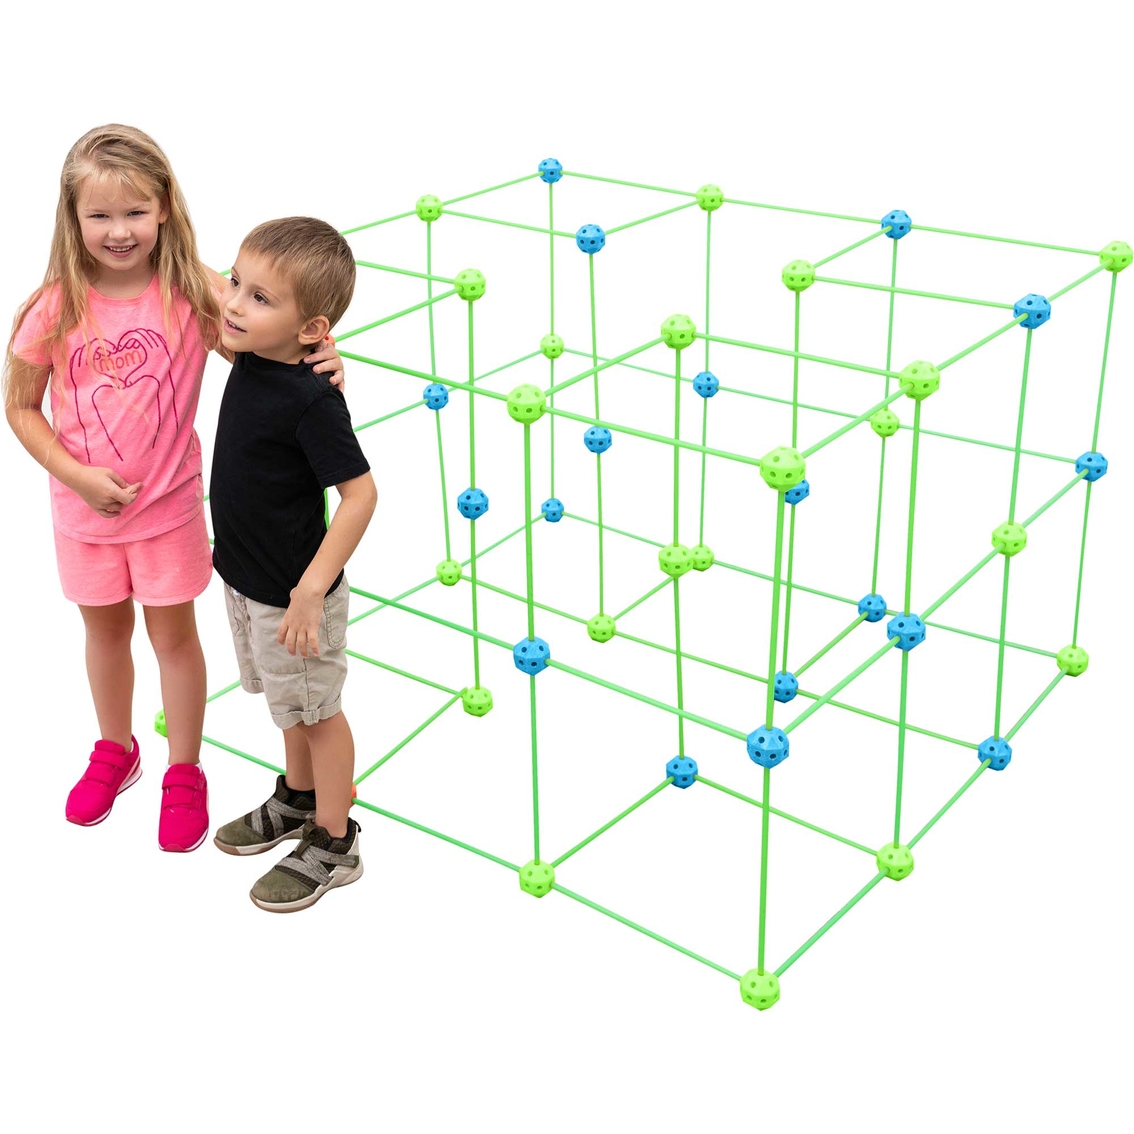 154 PCS Fort Building Kit Glow in The Dark For Kids Building